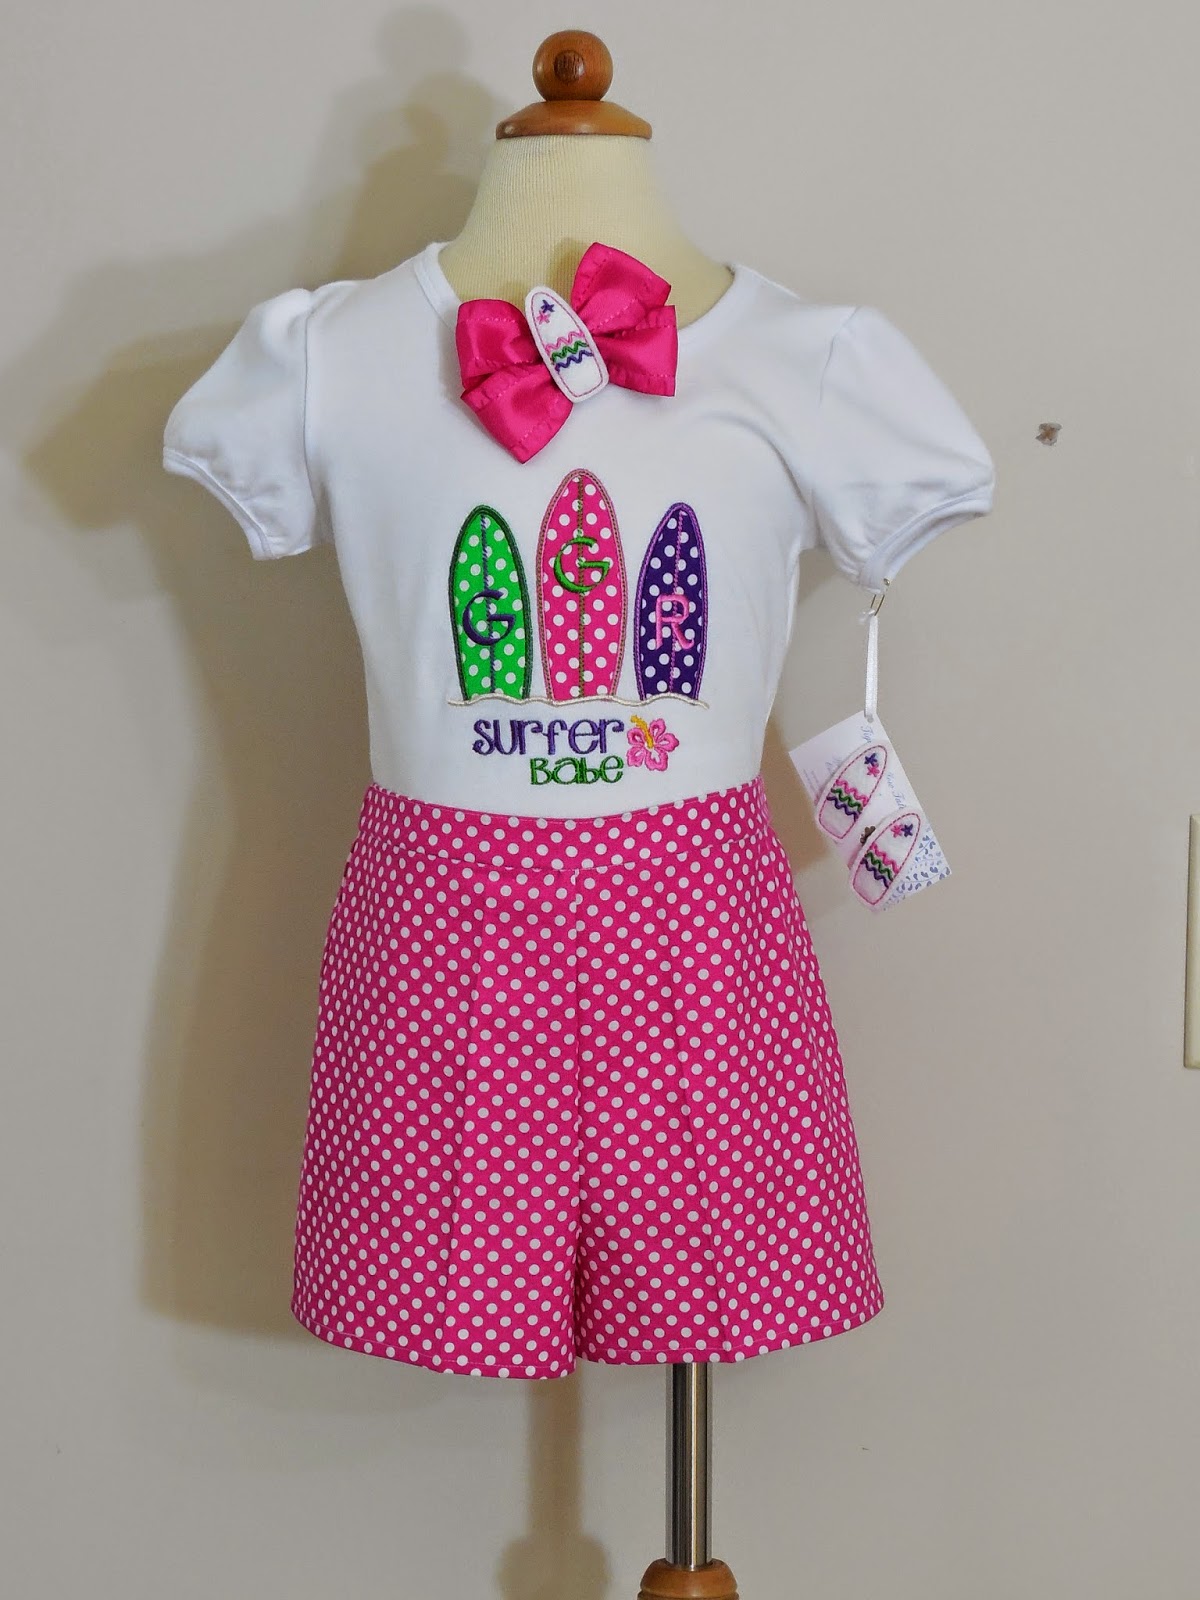 Tiger Swallow Tales Boutique: Birthday tees, Tutus and Accesories